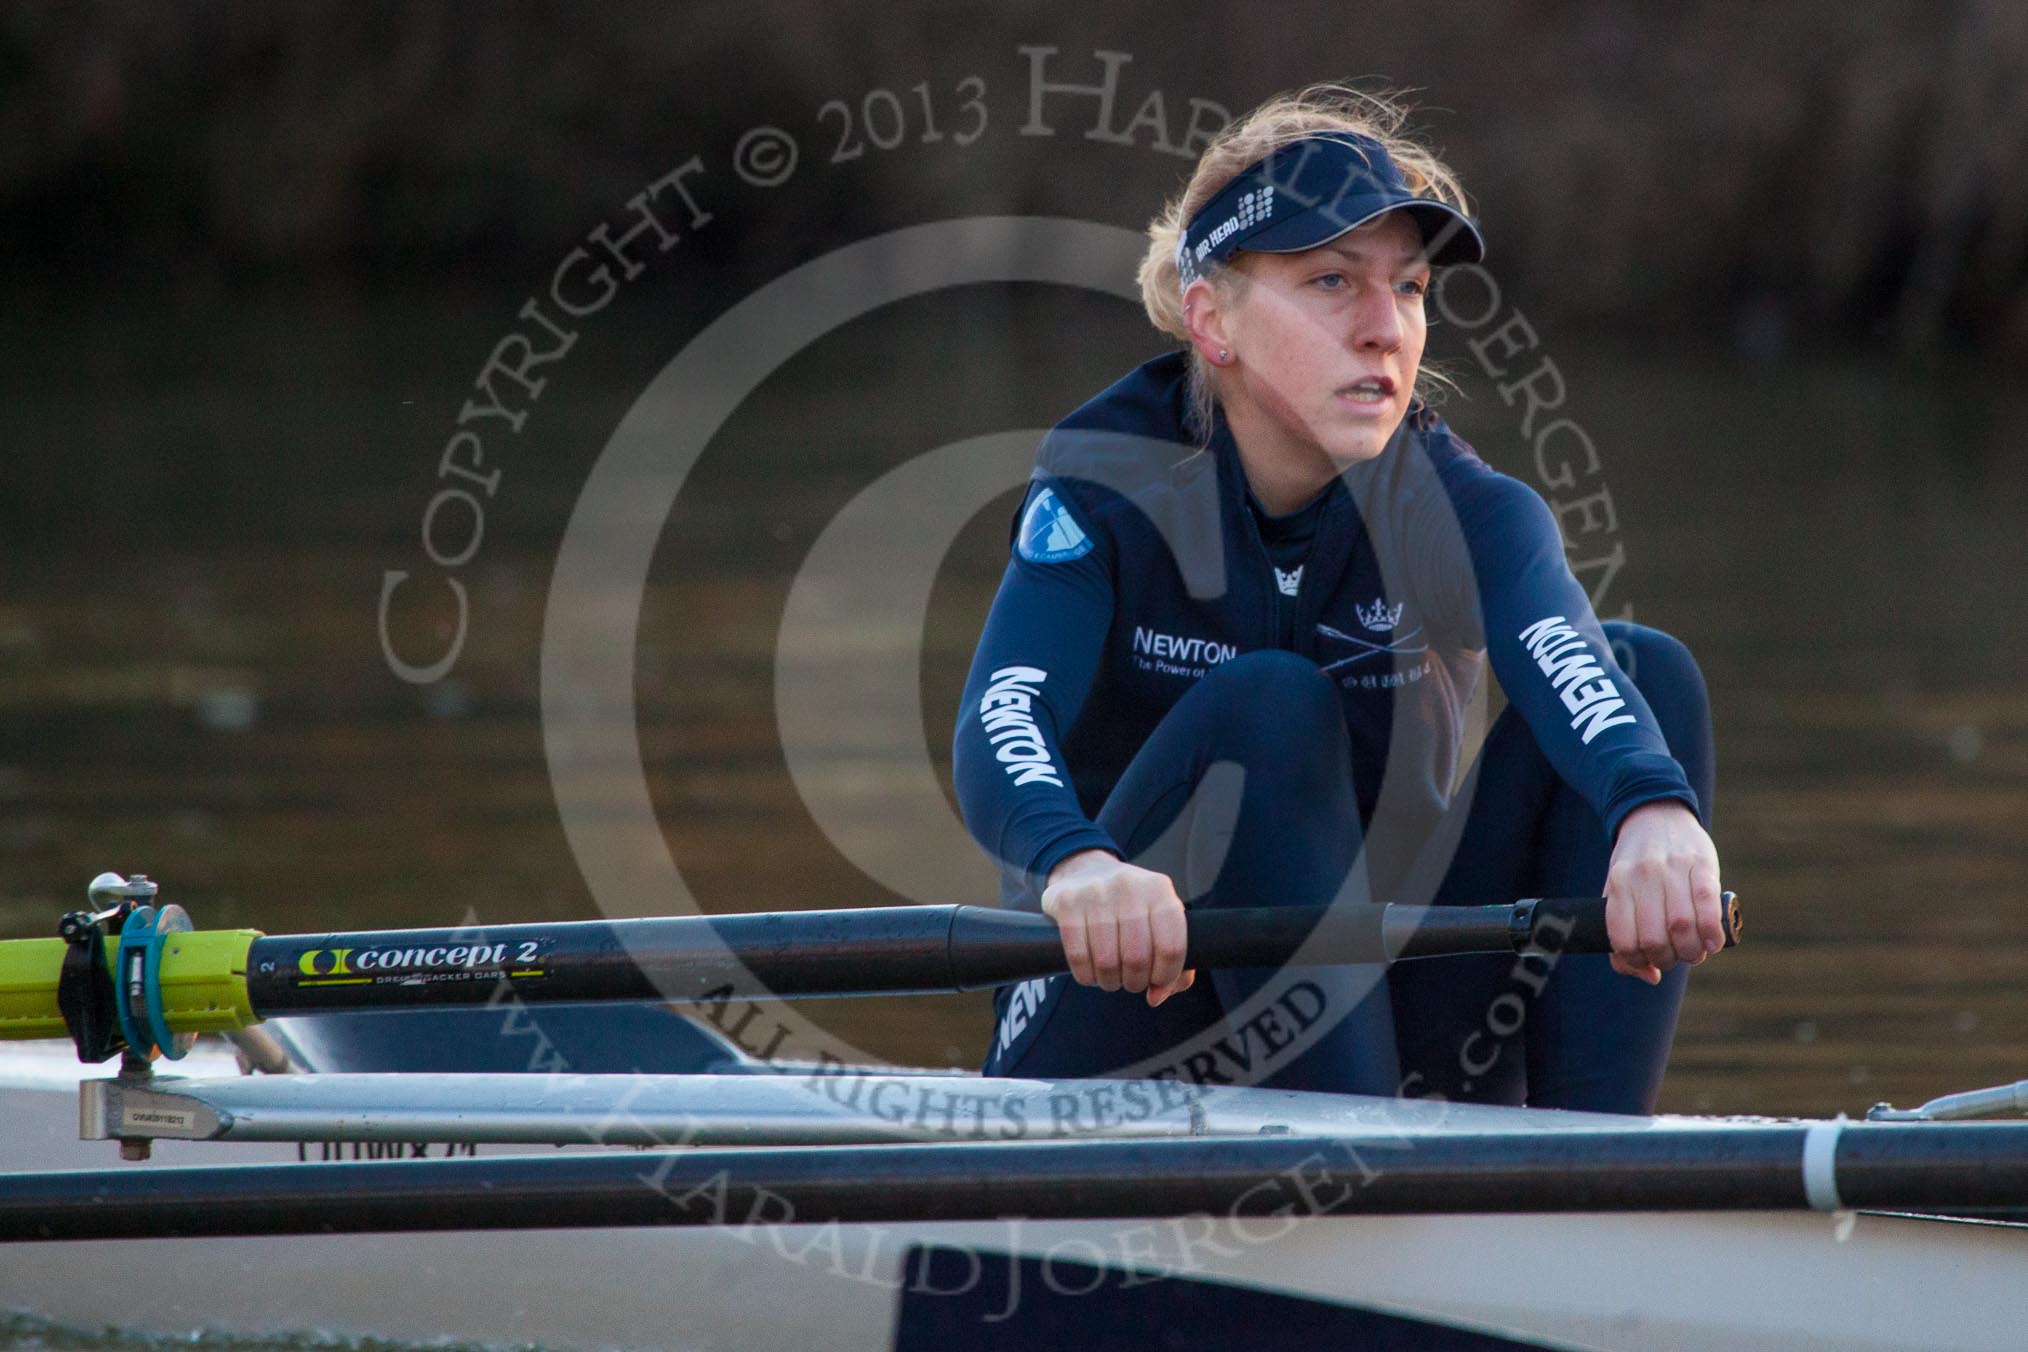 The Boat Race season 2013 - OUWBC training: OUWBC Blue Boat bow Mariann Novak..
River Thames,
Wallingford,
Oxfordshire,
United Kingdom,
on 13 March 2013 at 17:34, image #166